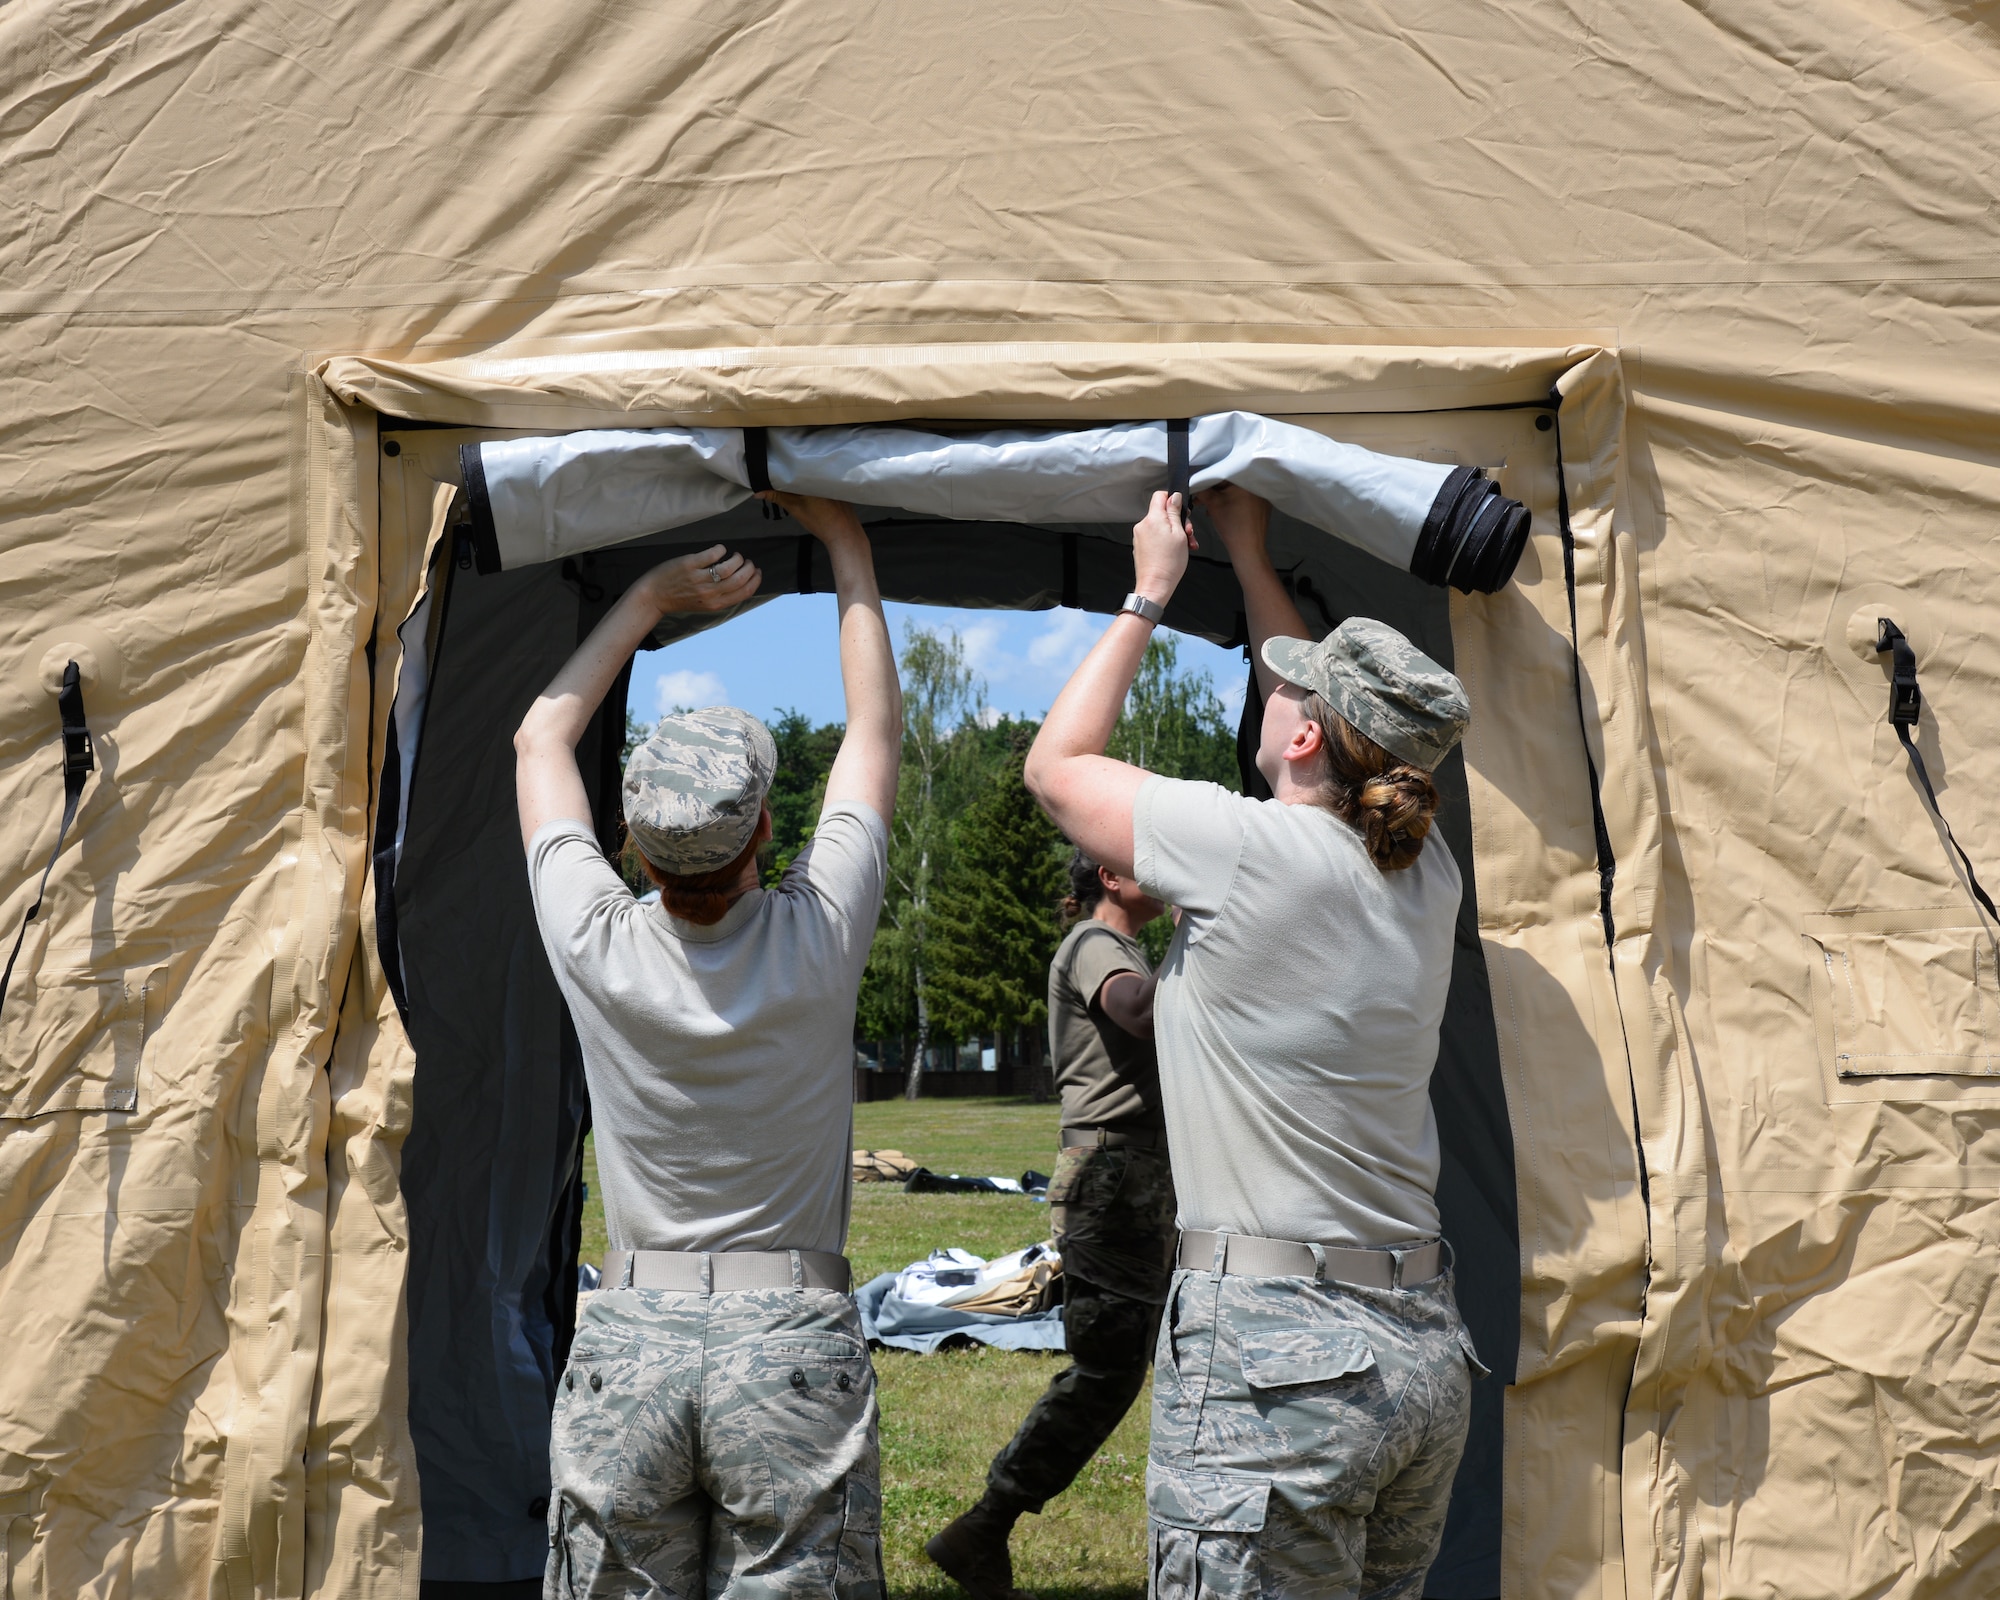 Airmen from the 86th Medical Group and the 86th Logistics Squadron set up an Expeditionary Medical Support System modular field hospital during en route patient staging training during Exercise Maroon Surge on Ramstein Air Base, Germany, June 4, 2018. The primary EMEDS missions are to: provide forward stabilization and resuscitative care; deliver primary care, dental services, and force health protection; and prepare casualties to evacuate to the next level of care. (U.S. Air Force photo by Airman 1st Class Ariel Leighty)